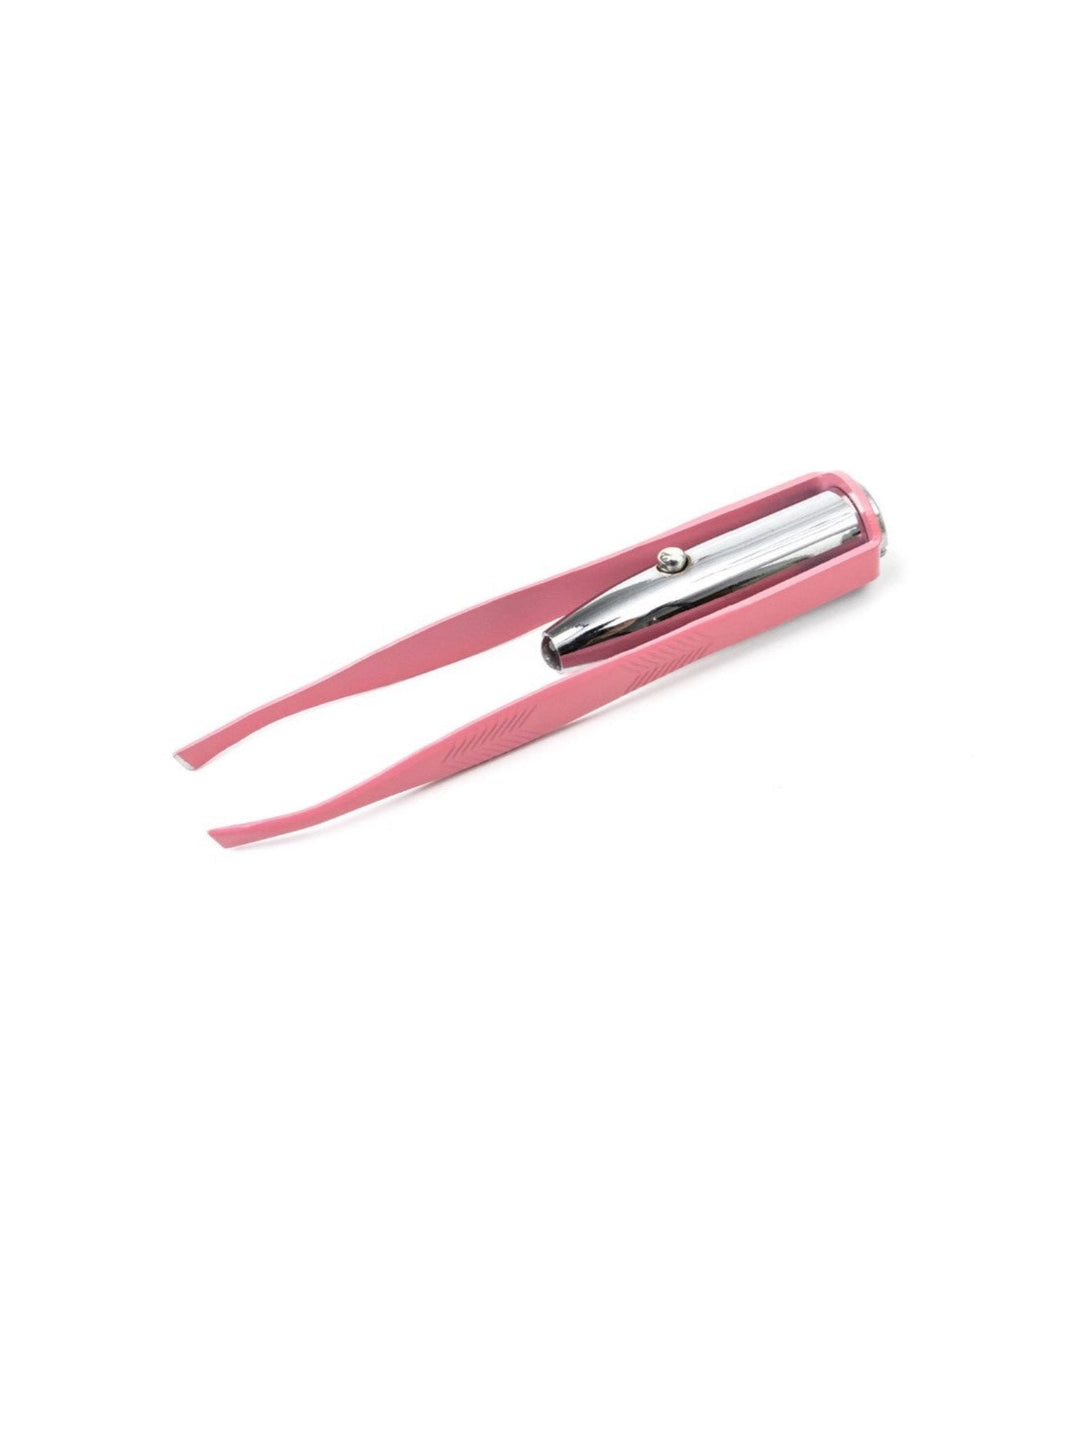 Center Stage Light Up Tweezers, Prickly Pear